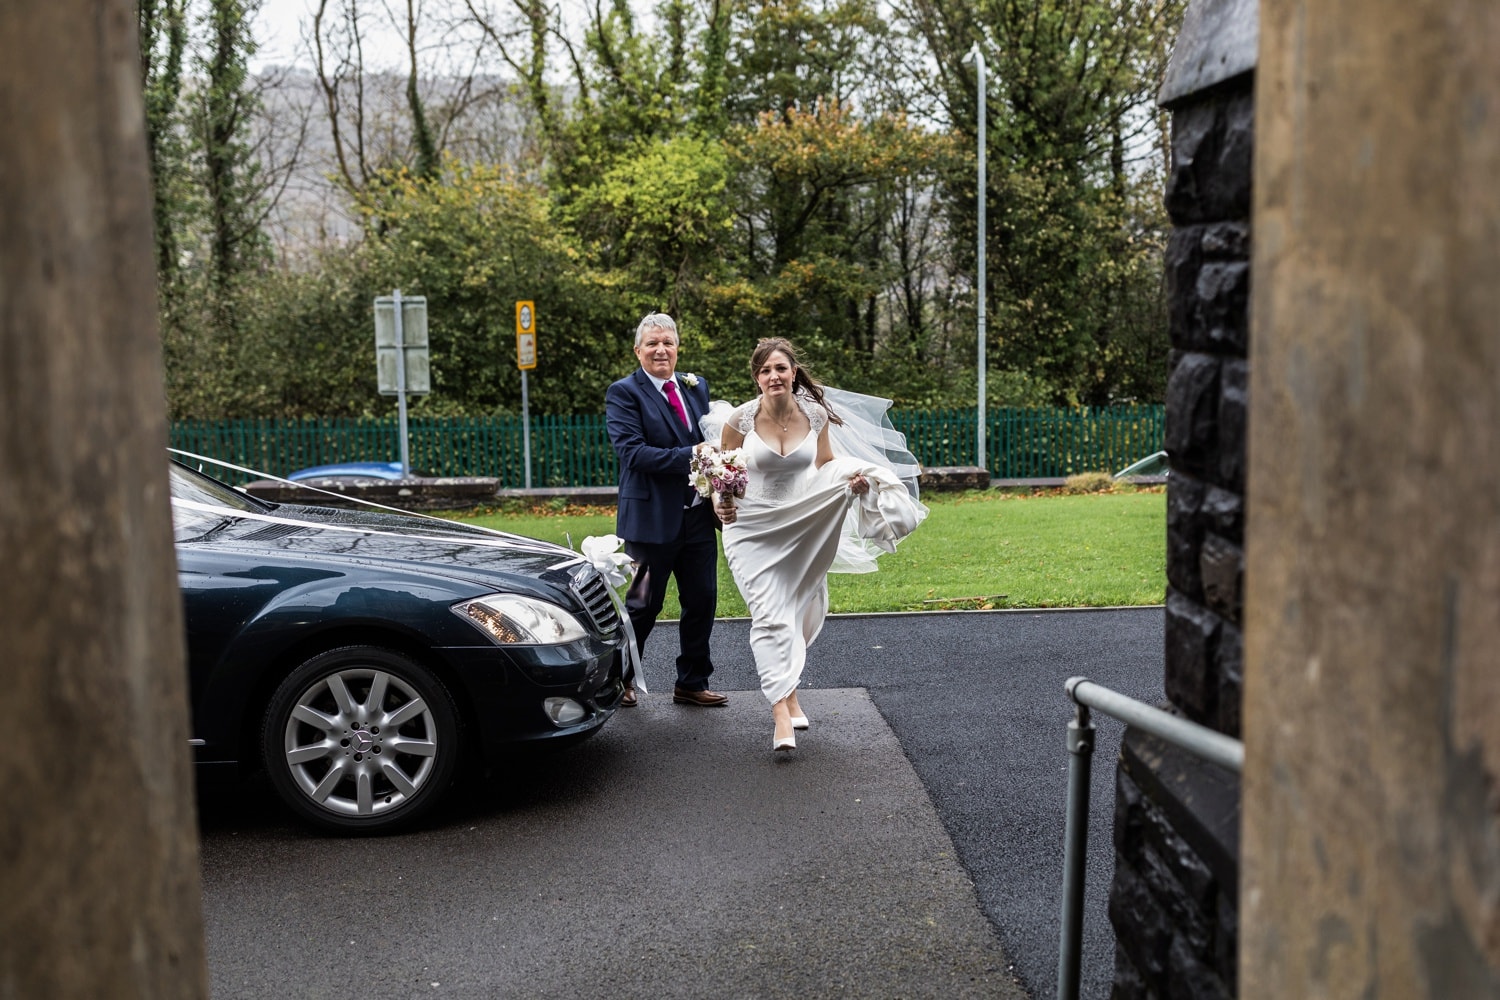 Marriage ceremony at St Anne's Church, Tonna